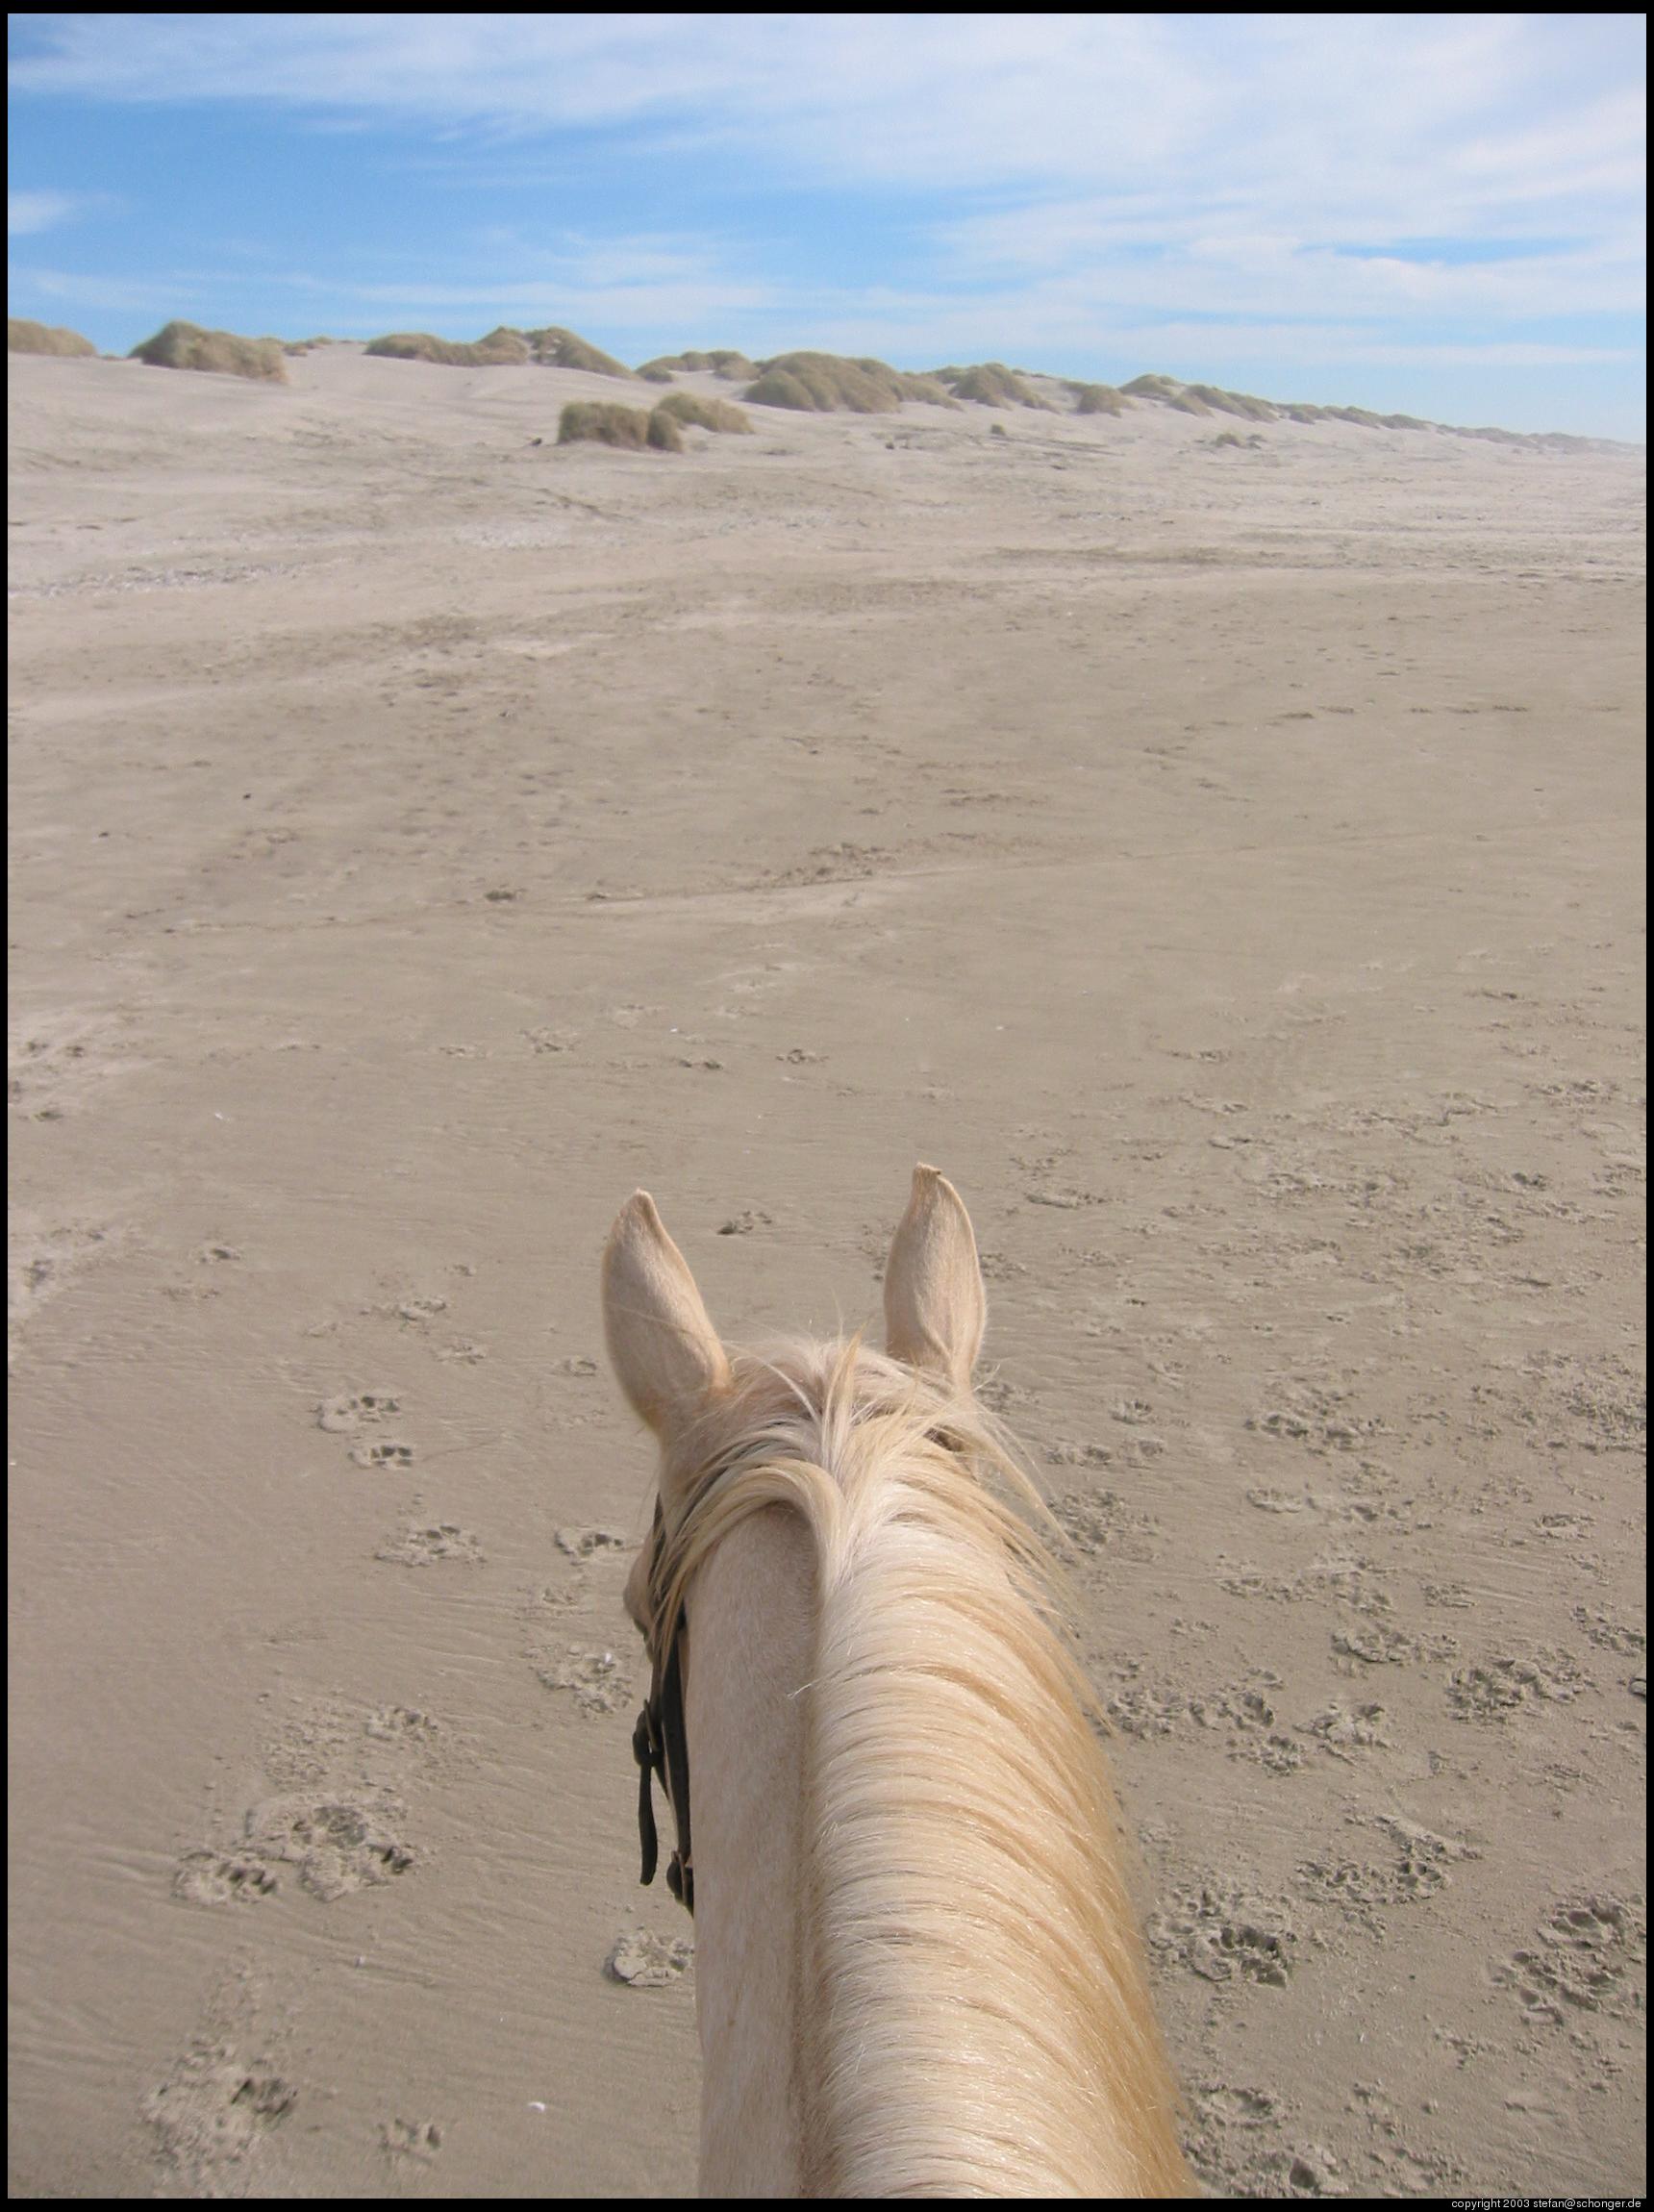 Riding on the beach, Oregon dunes near Florence, OR